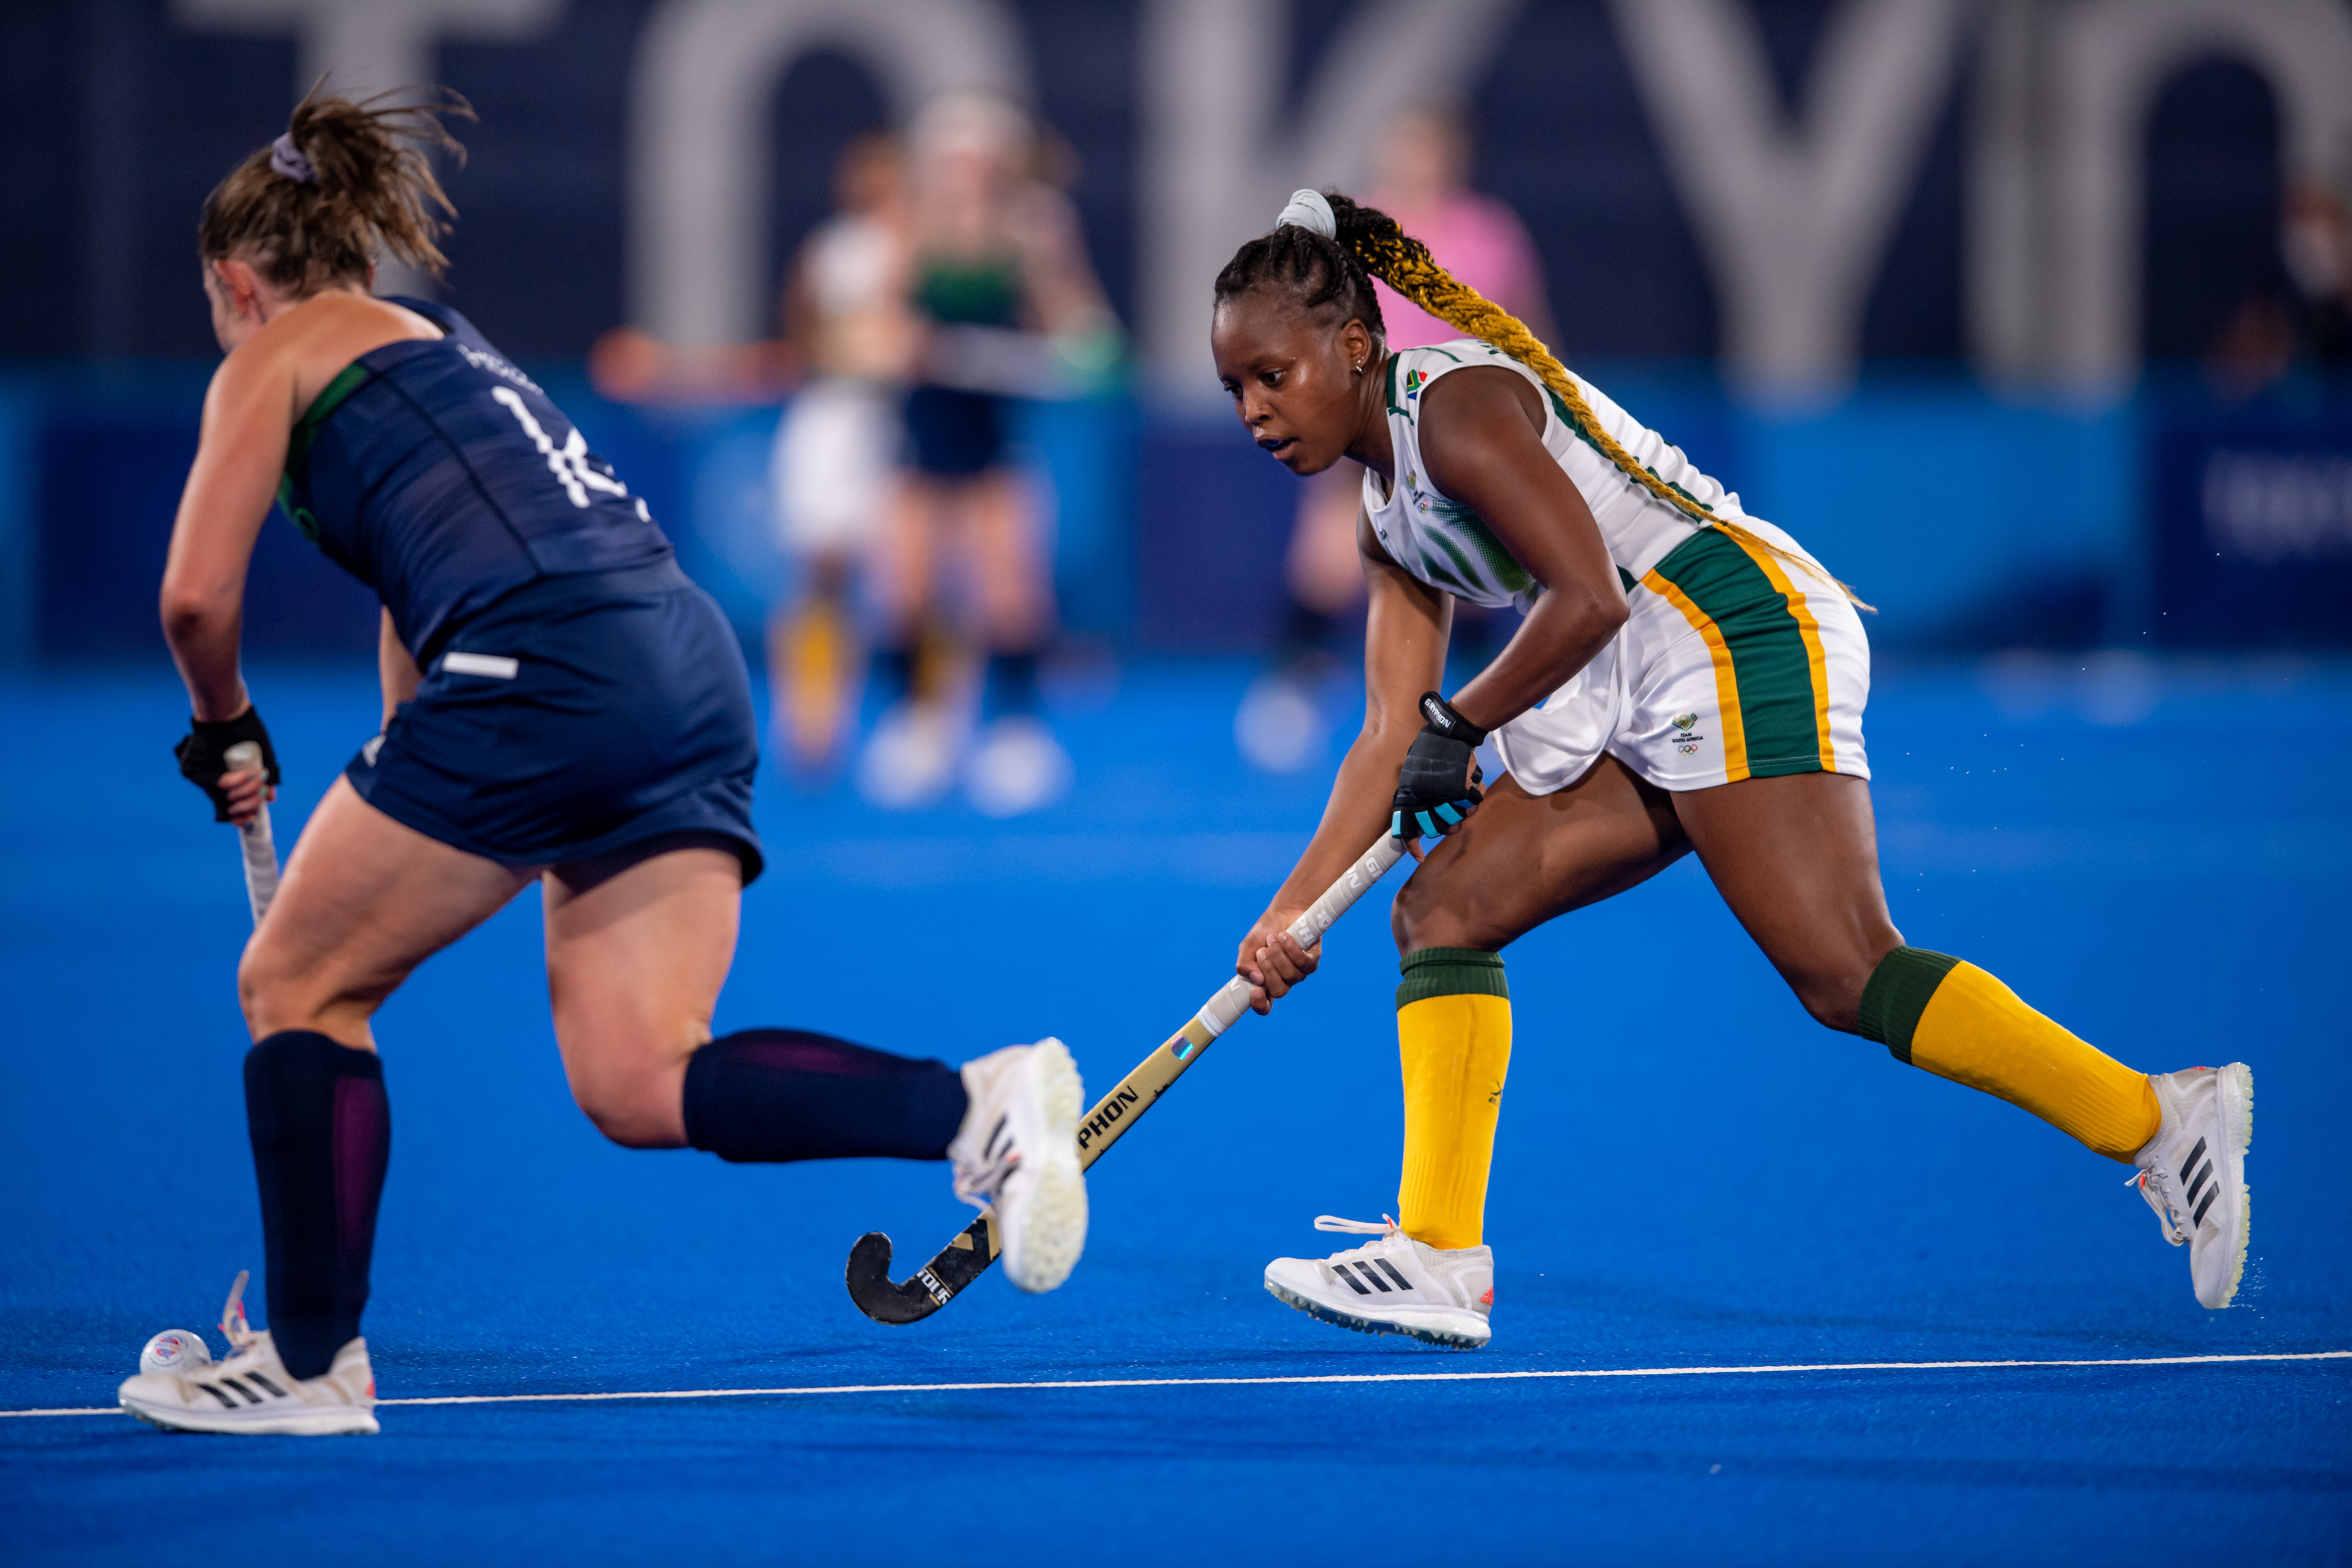 TOKYO, JAPAN - JULY 24: Edith Molikoe of South Africa in action during the Women's Hockey match between South Africa and Ireland on Day 1 of the Tokyo 2020 Olympic Games at South Pitch, Oi Hockey Stadium on July 24, 2021 in Tokyo, Japan.(Photo by Anton Geyser/Gallo Images)